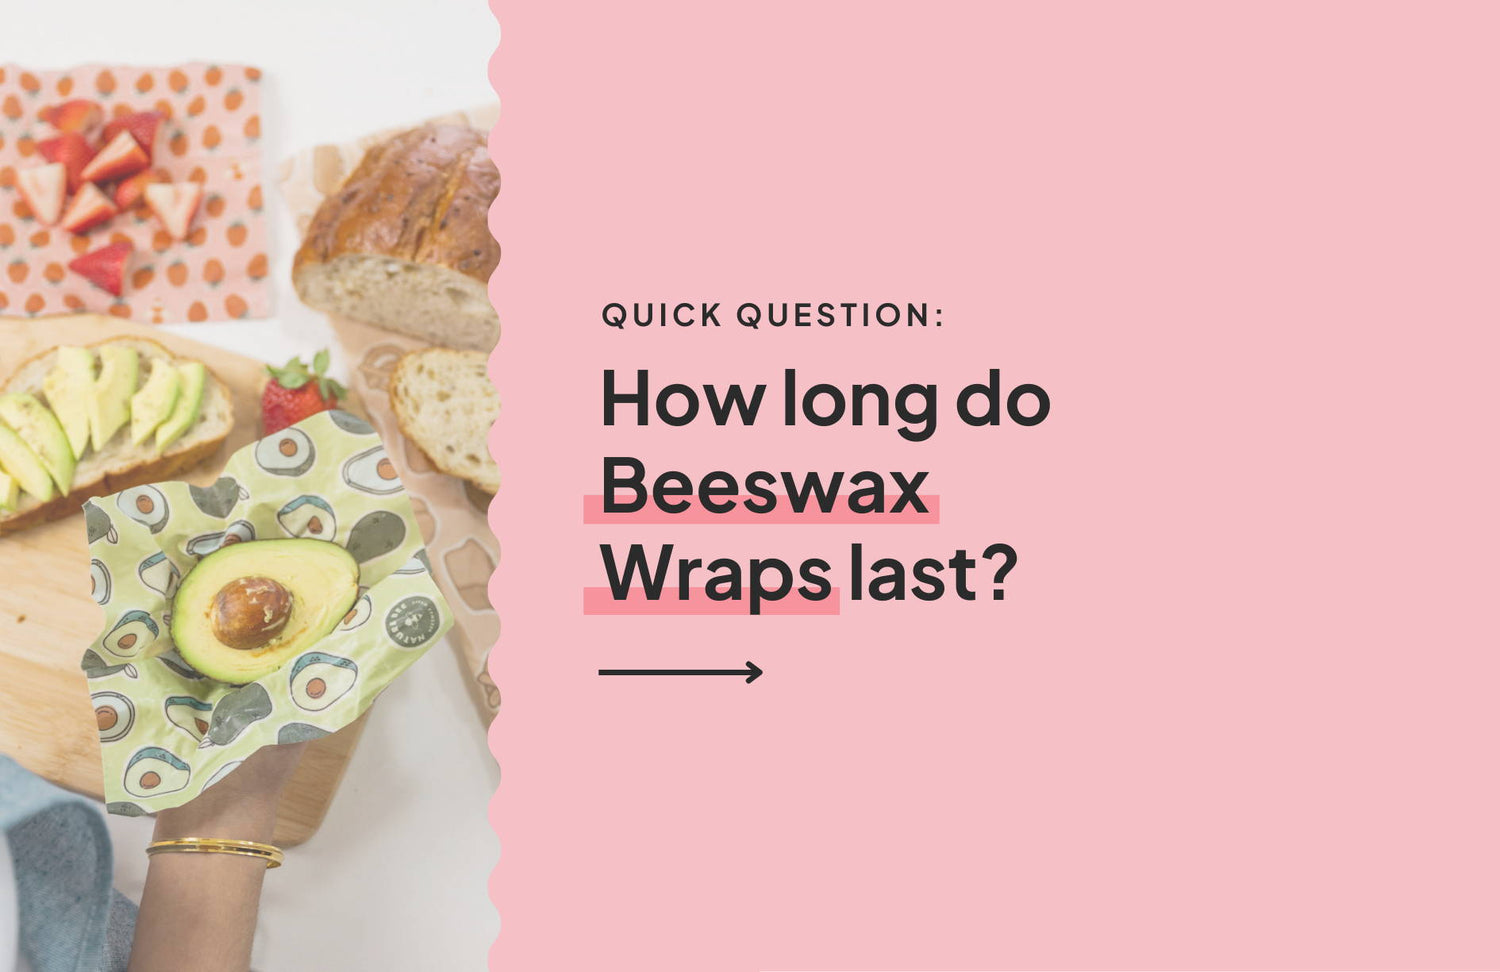 How Long do Beeswax Wraps Last?